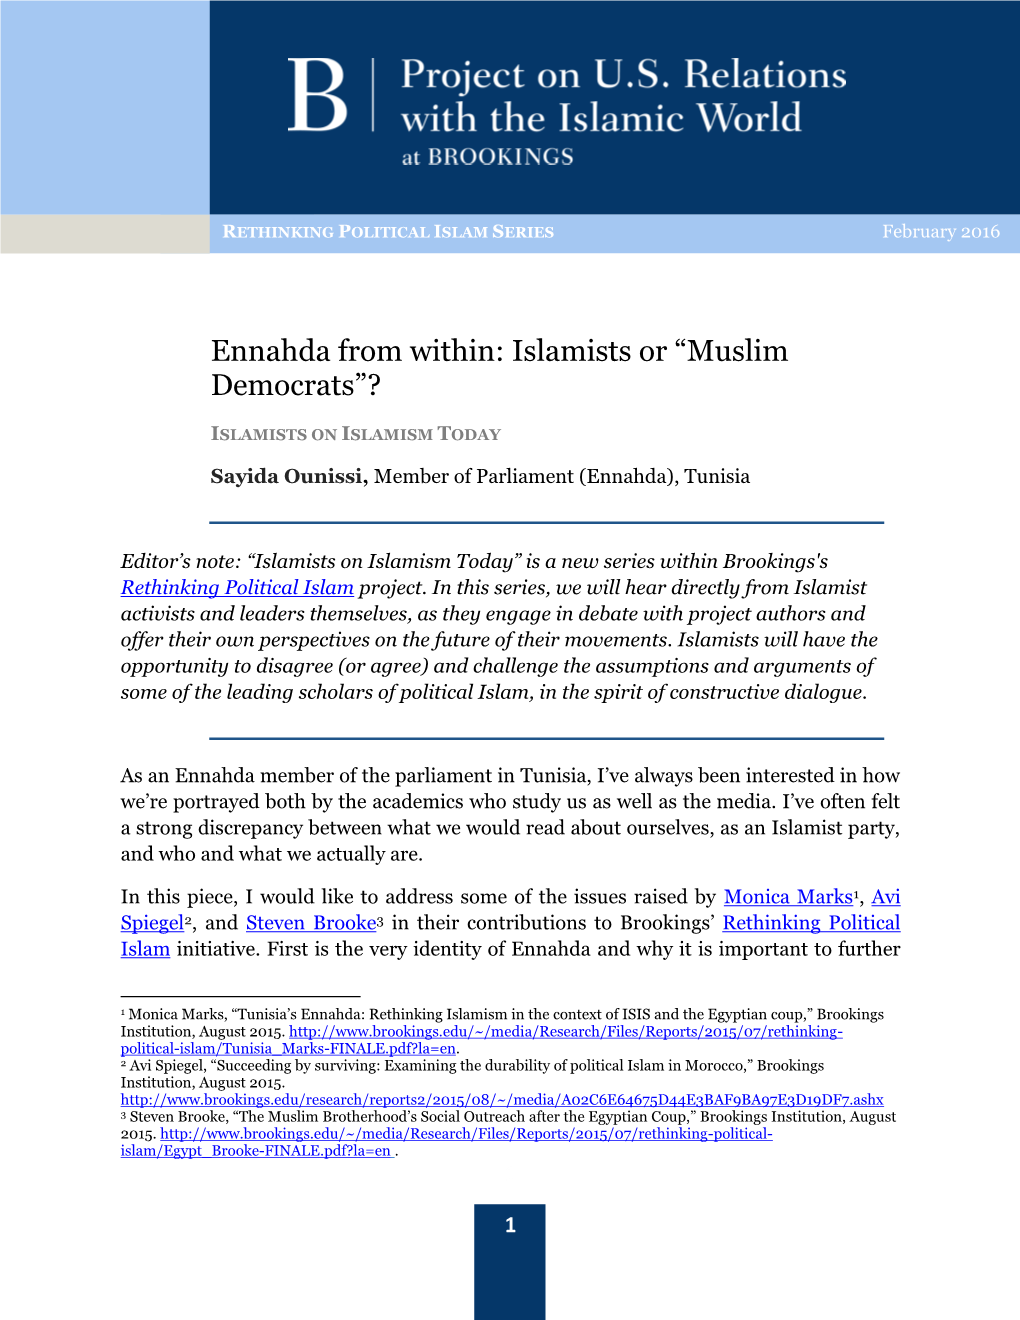 Ennahda from Within: Islamists Or “Muslim Democrats”?